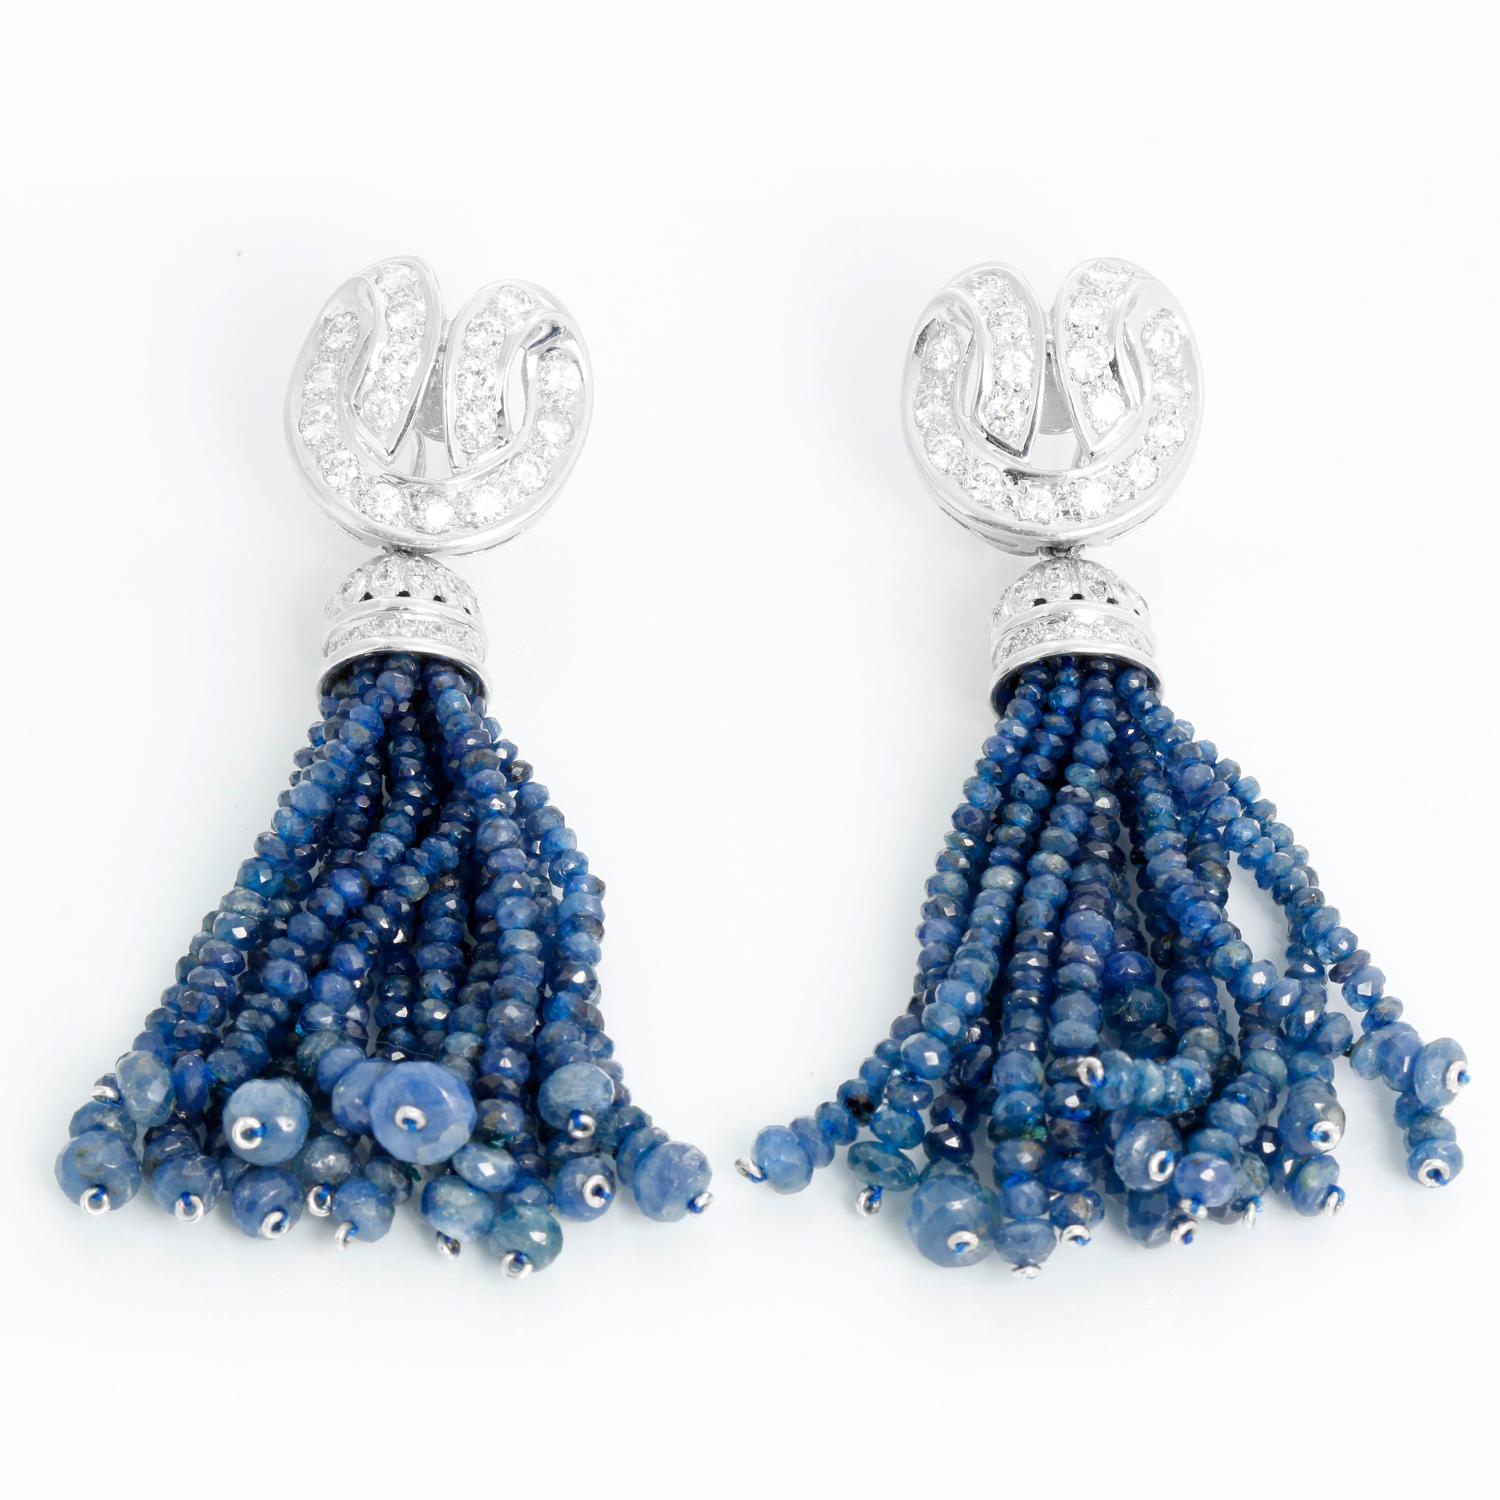 Sapphire & Diamond Dangle Earrings - Tassel earrings featuring full cut diamonds weighing 2.50 carats. with Sapphire beads ranging from 2.25mm to 8.85 mm set in 14K White gold. Dimensions are 3 inches by 13/16 inch. Diamond Color G-H-I Clarity SI.